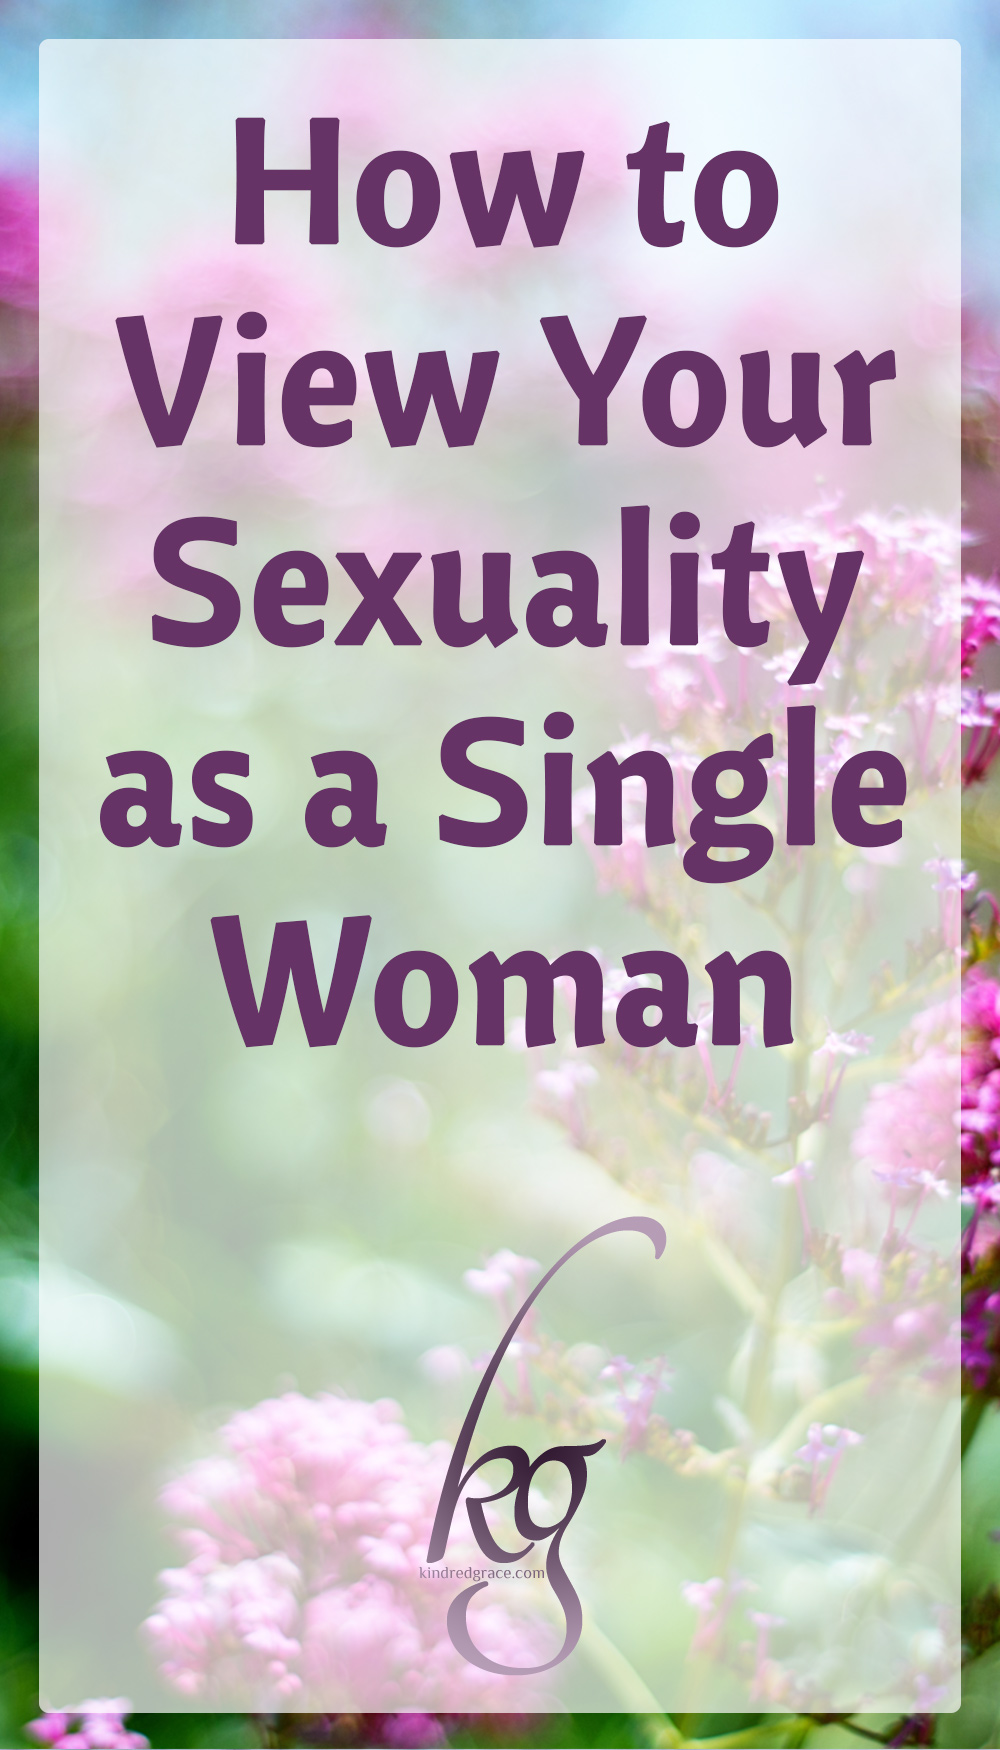 We know that God has designed sex for marriage, but our sexuality exists long before marriage is on the horizon. How do we view our divinely created sexual design before we say “I do”? via @KindredGrace